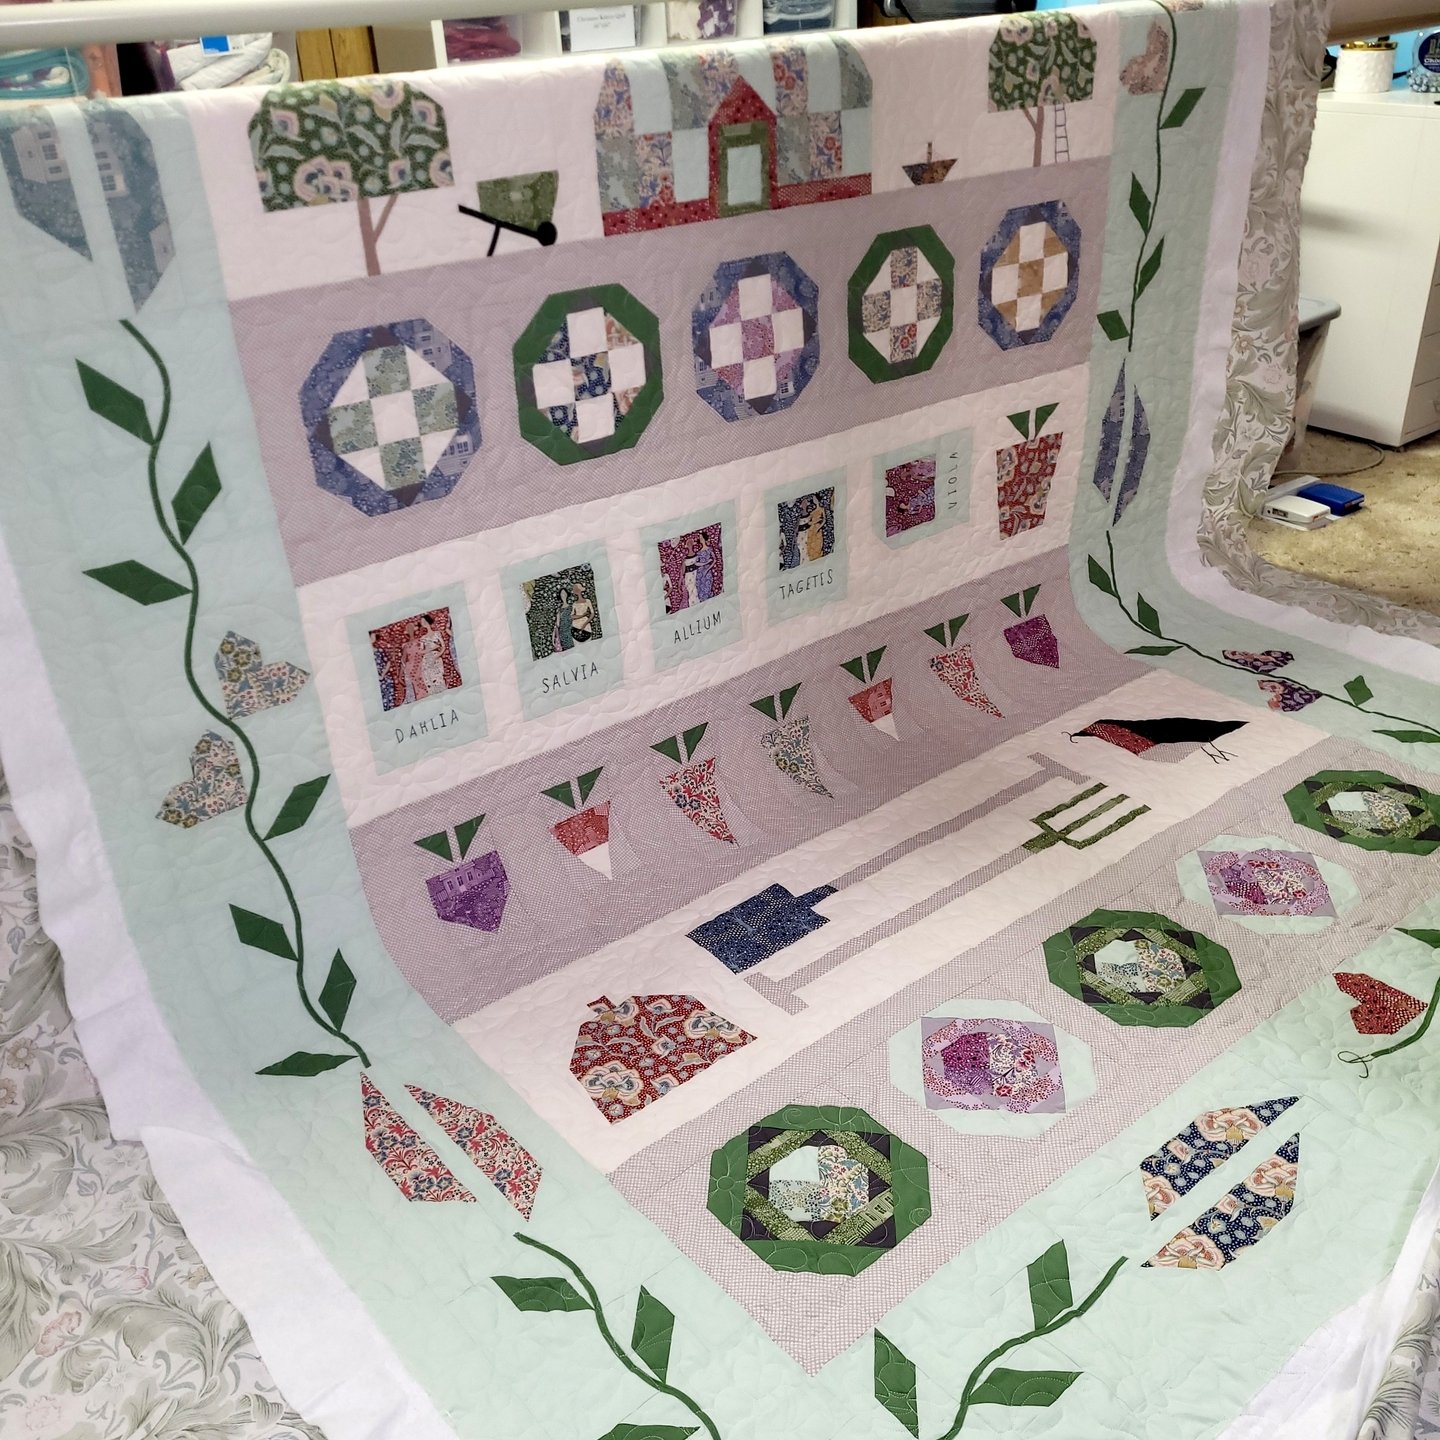 Lisa sent me a gorgeous garden to quilt!

It's FILLED with hand-embroidered accents, and appliqu&eacute; elements!

Lisa chose Busy Bees for the quilting, which adds adorable flowers and bees to her quilt!

Quilt: Kitchen Garden by Nicola Dodd @nicol